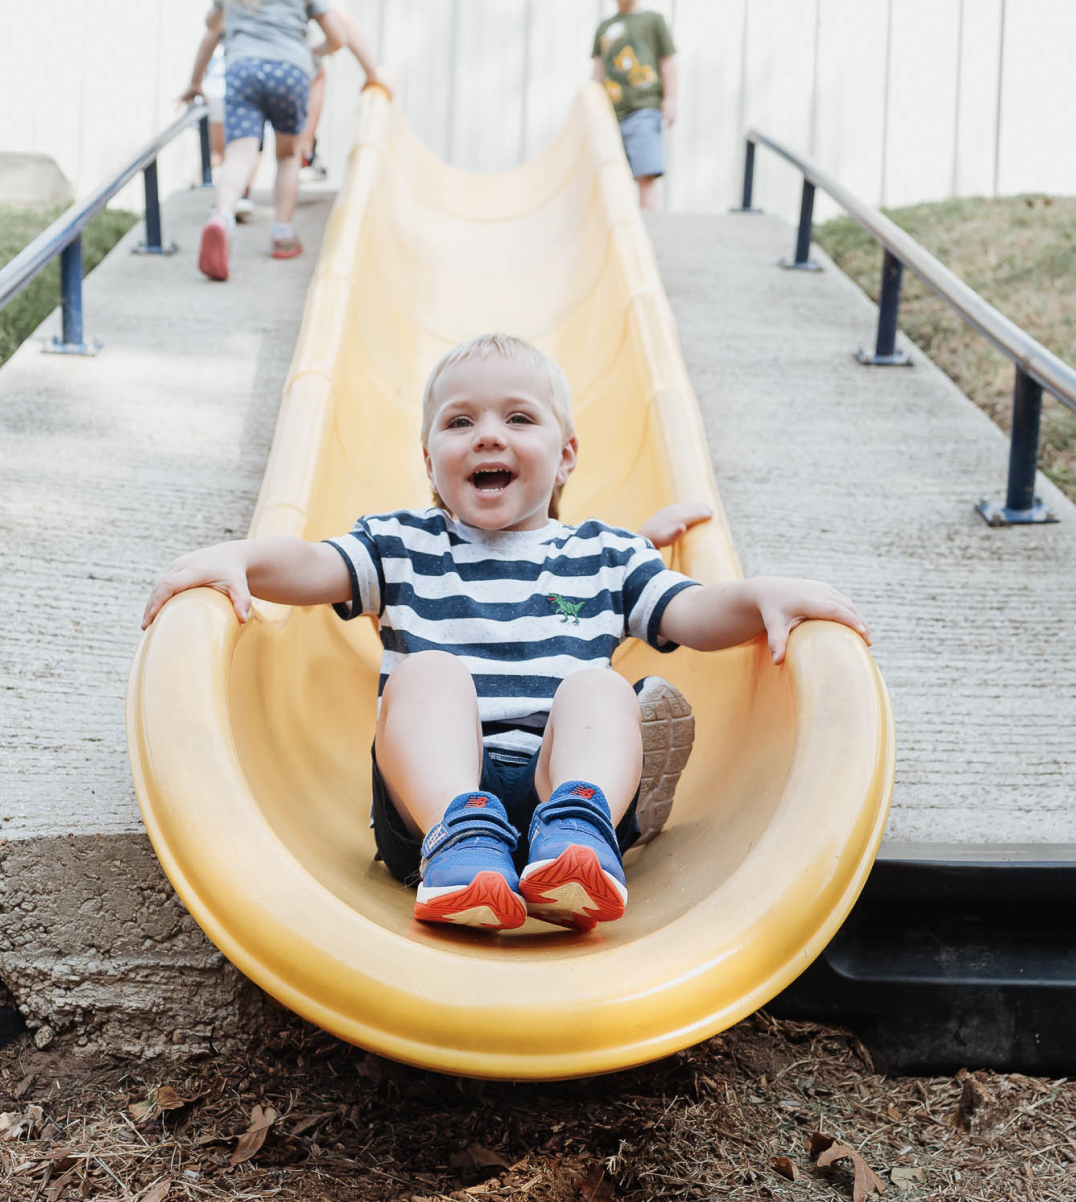 boy smiling while on a slide